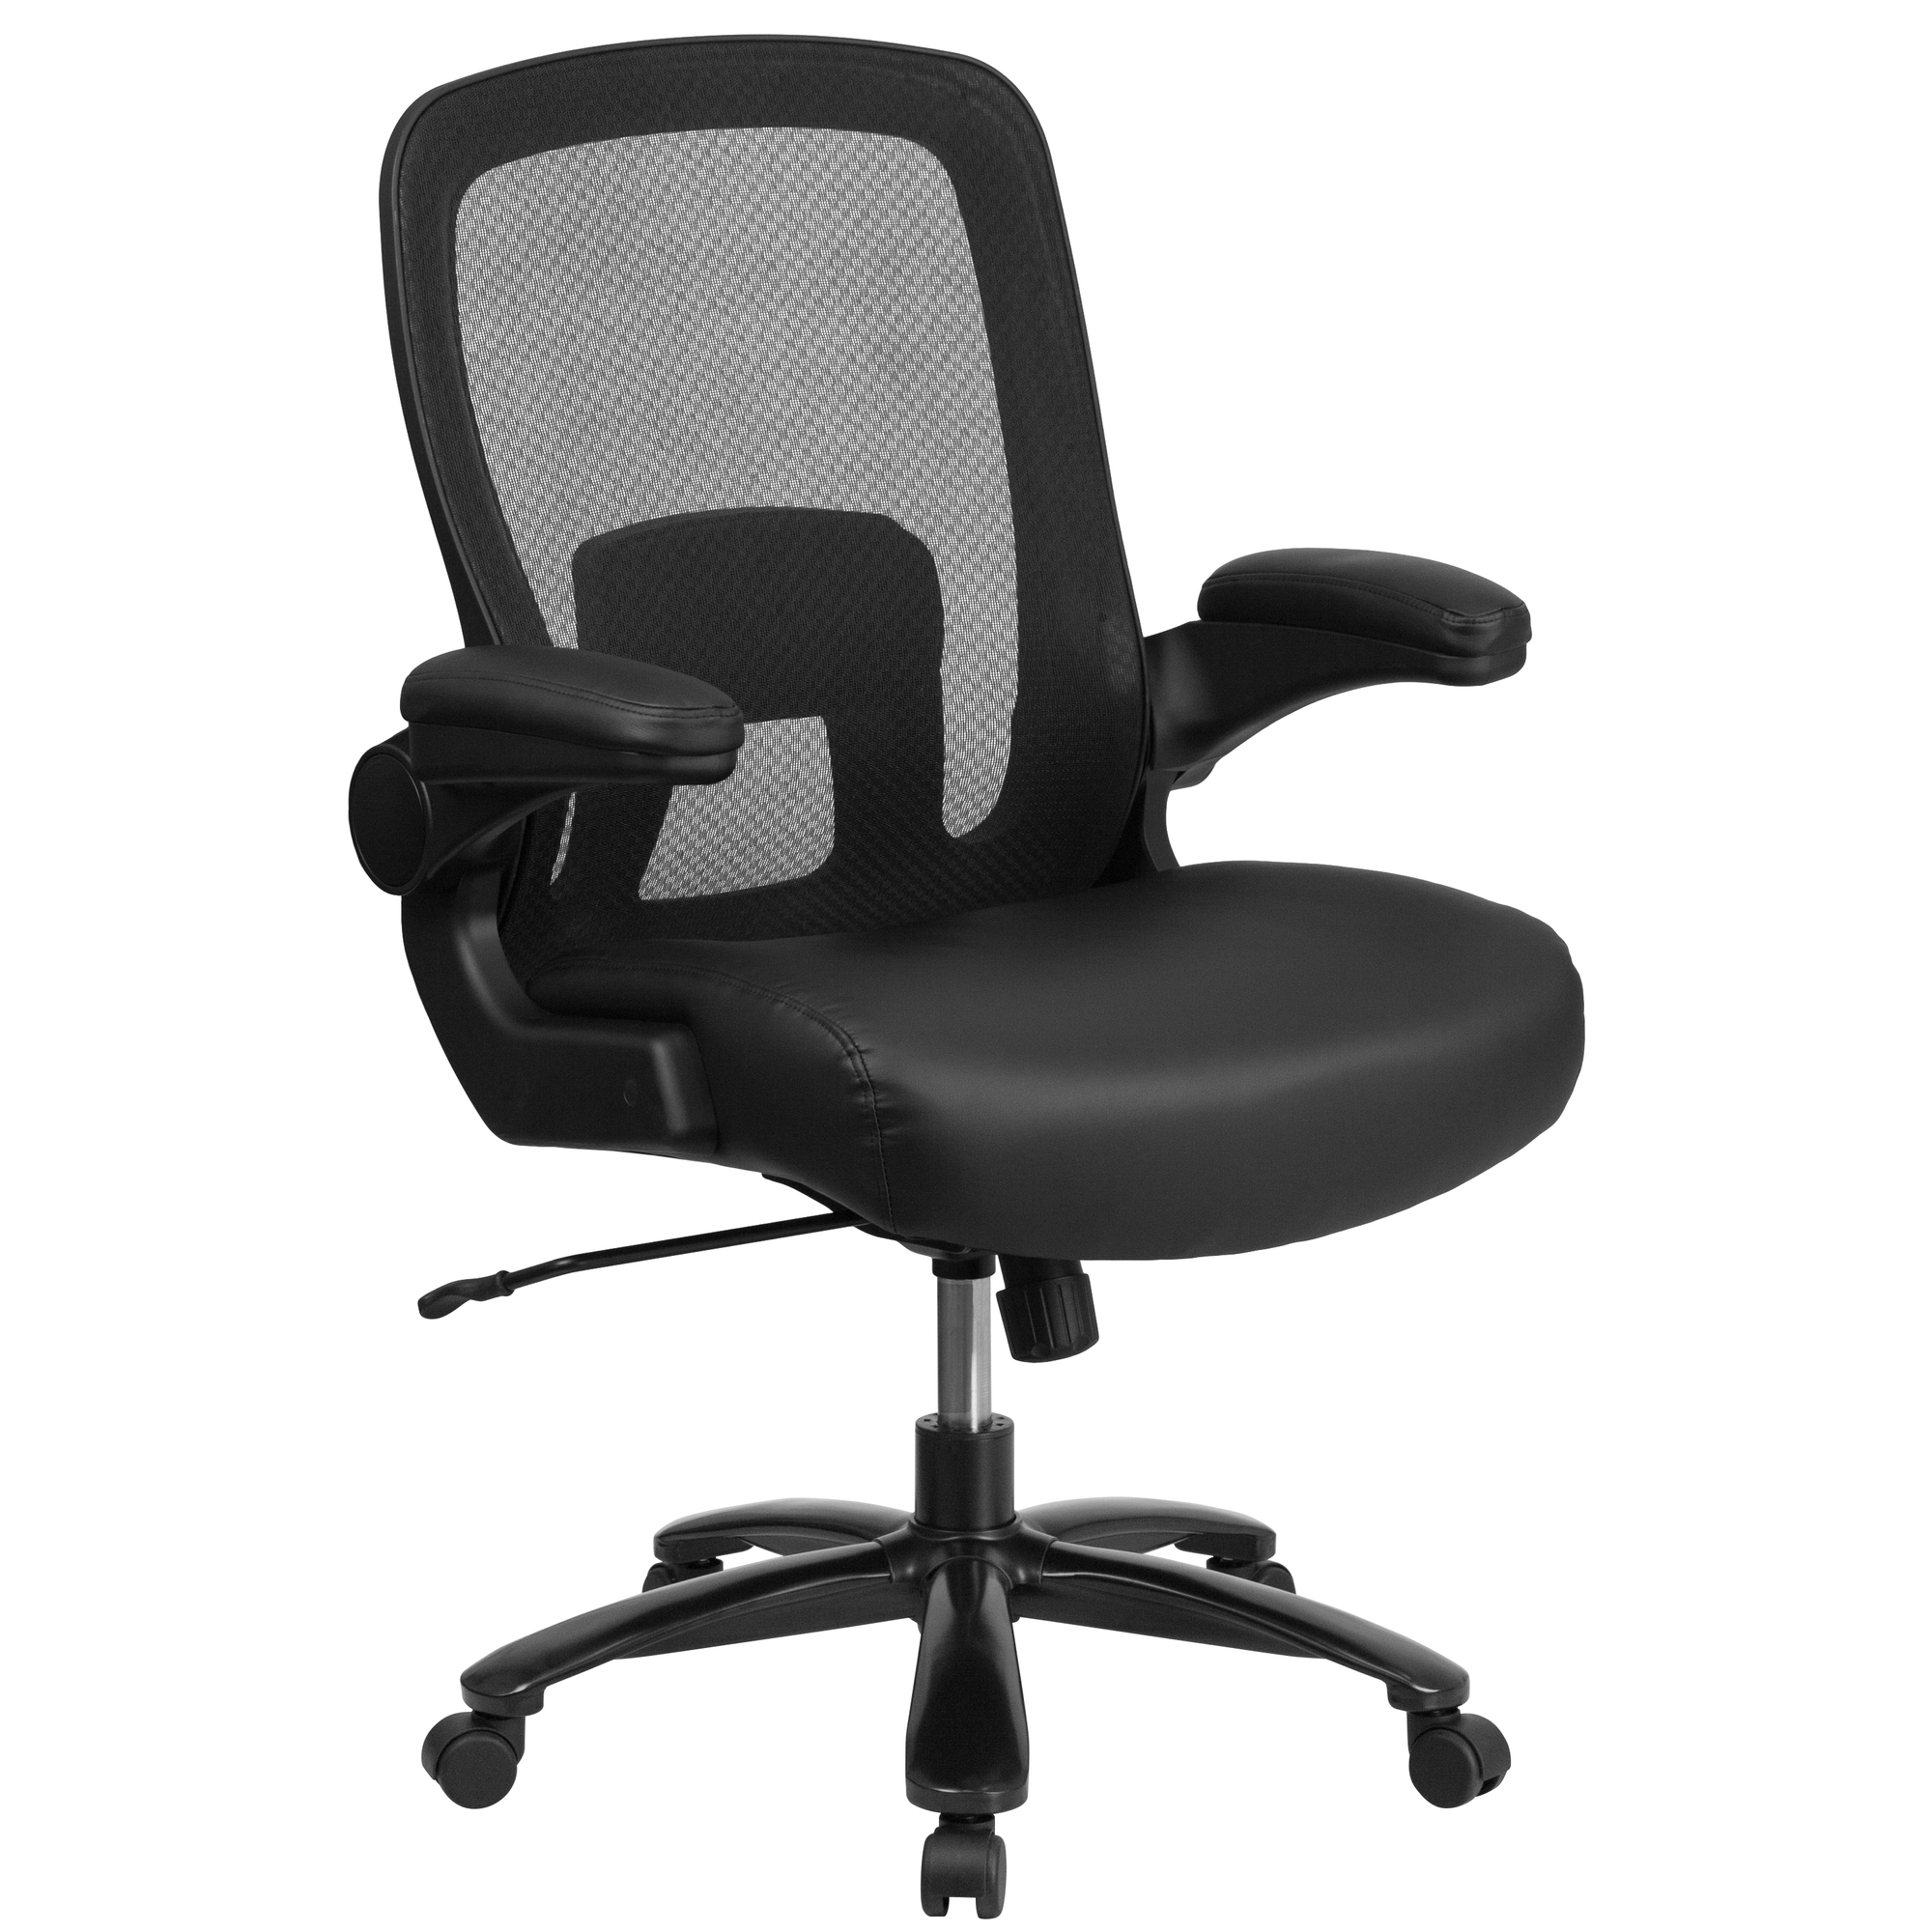 Flash Furniture, Big Tall 500 lb. Rated Black LeatherSoft Chair, Primary Color Black, Included (qty.) 1, Model BT20180LEA